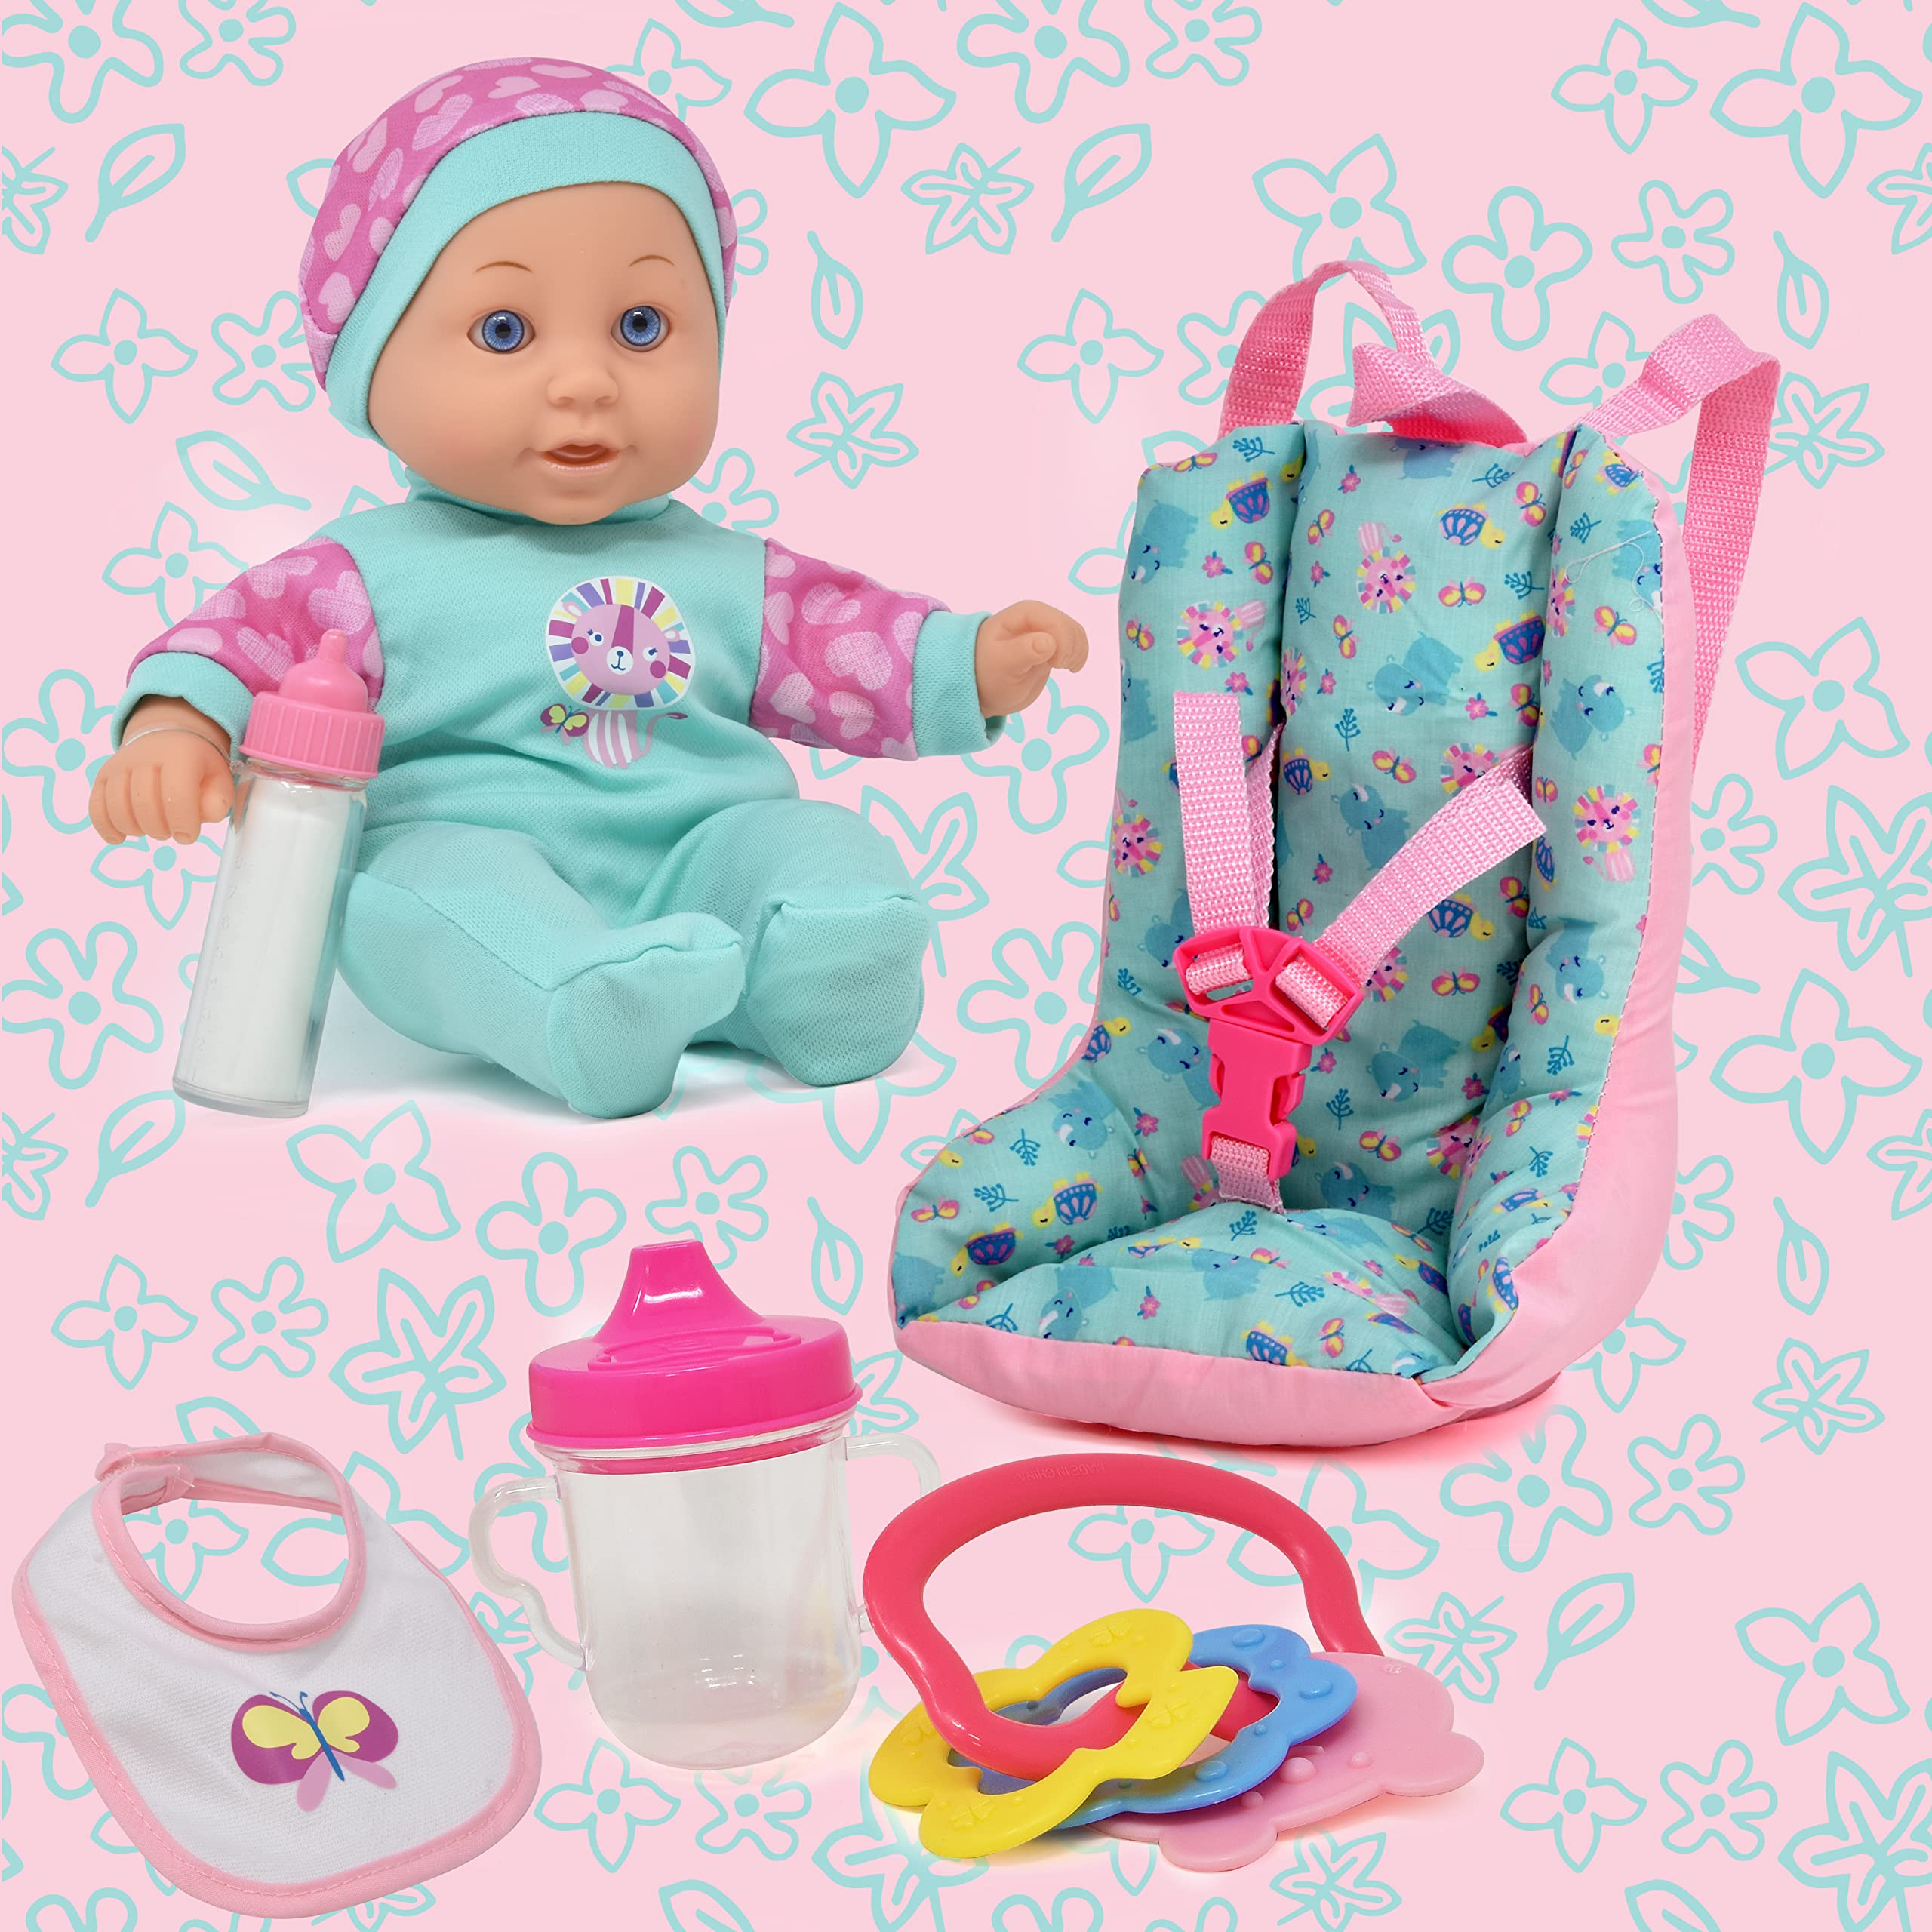 12 Inch Soft Body Baby Doll with Car Seat Carrier Backpack, Baby Doll with 2 Feeding Bottles Bib Rattle Toy Accessories Baby Doll Travel Gift Play Set for Toddlers Infants Kids Girls and Boys